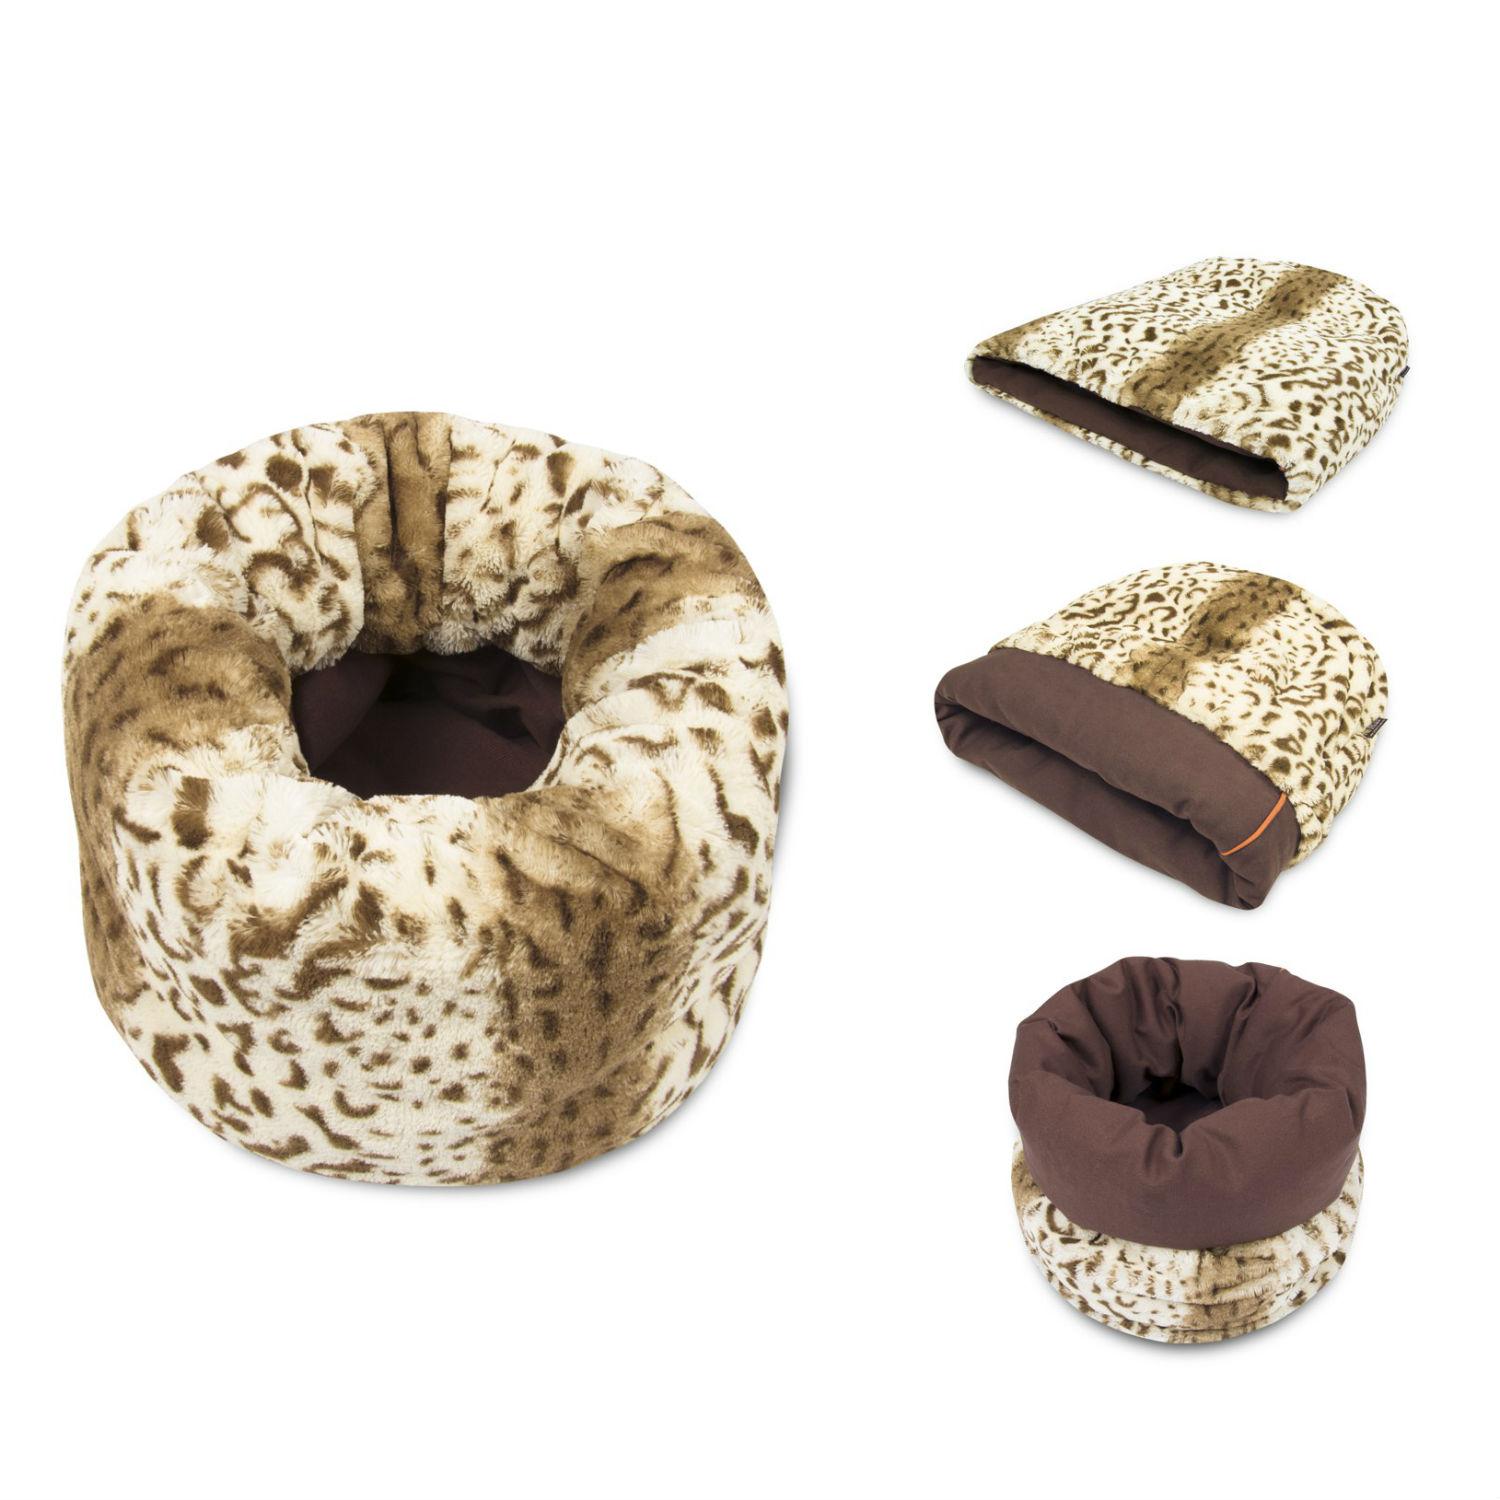 P.L.A.Y. Snuggle Dog Bed - Leopard Brown